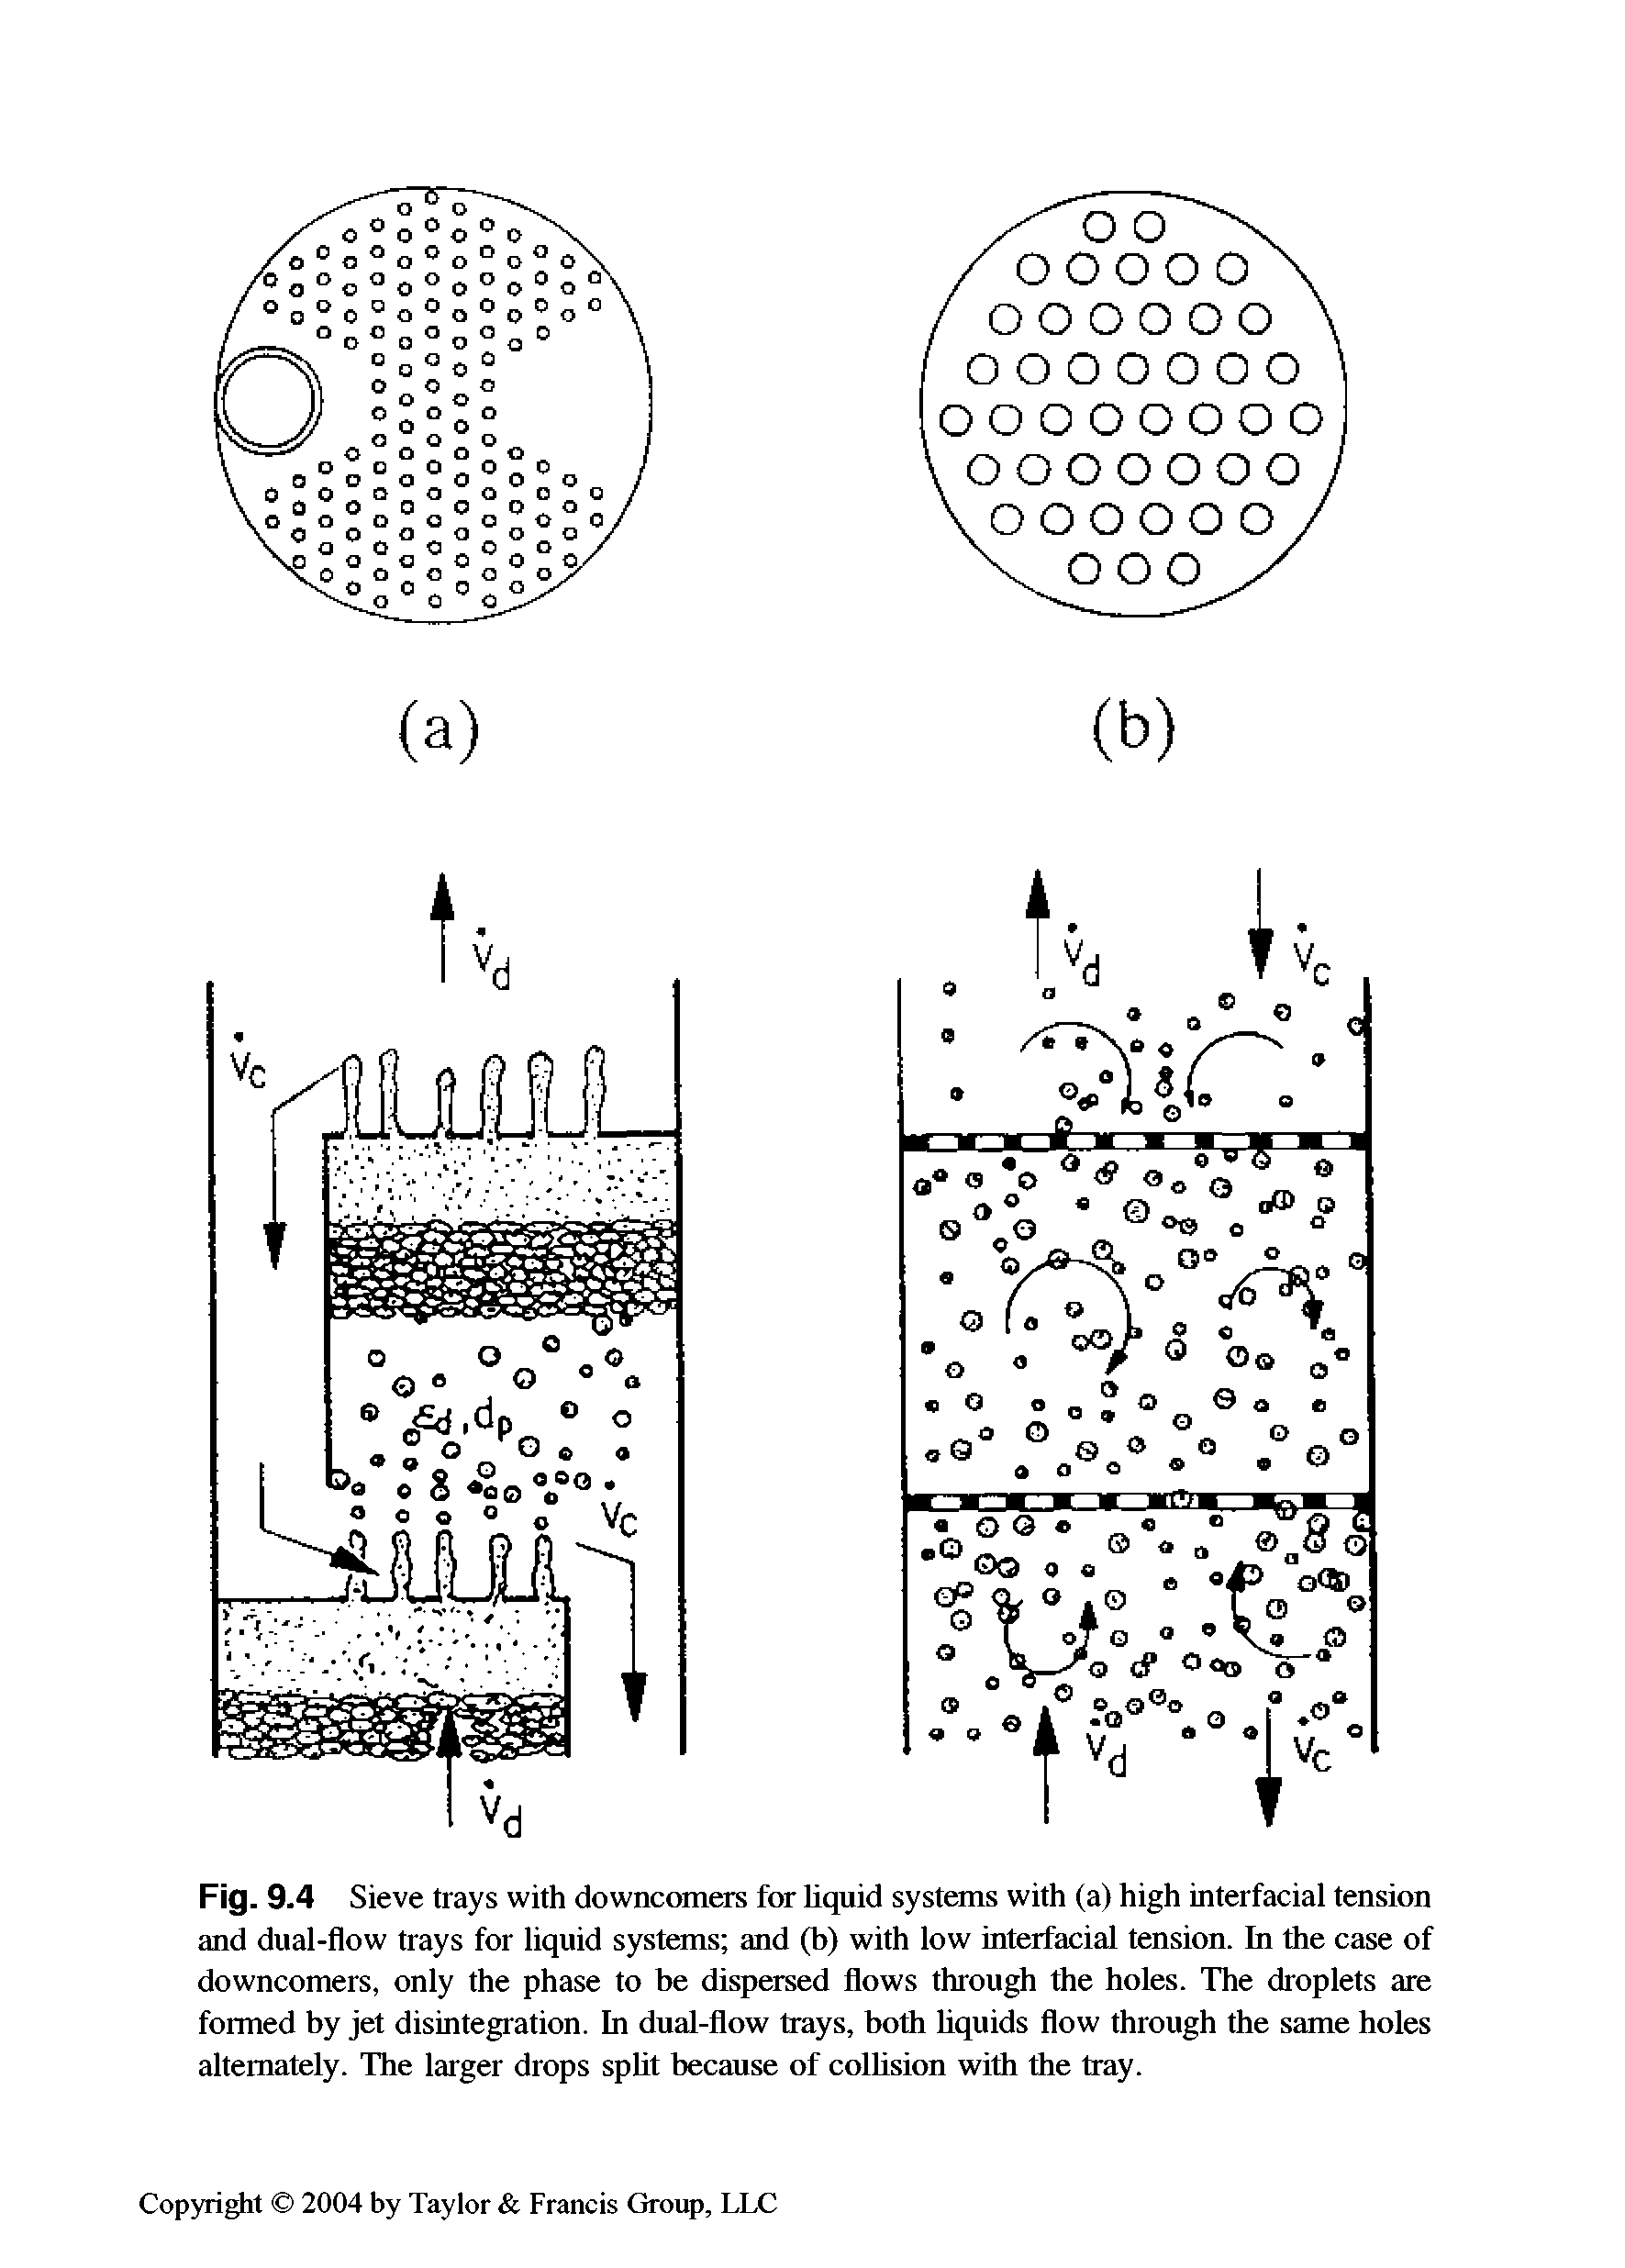 Fig. 9.4 Sieve trays with downcomers for liquid systems with (a) high interfacial tension and dual-flow trays for liquid systems and (b) with low interfacial tension. In the case of downcomers, only the phase to be dispersed flows through the holes. The droplets are formed by jet disintegration. In dual-flow trays, both hquids flow through the same holes alternately. The larger drops spUt because of colhsion with the tray.